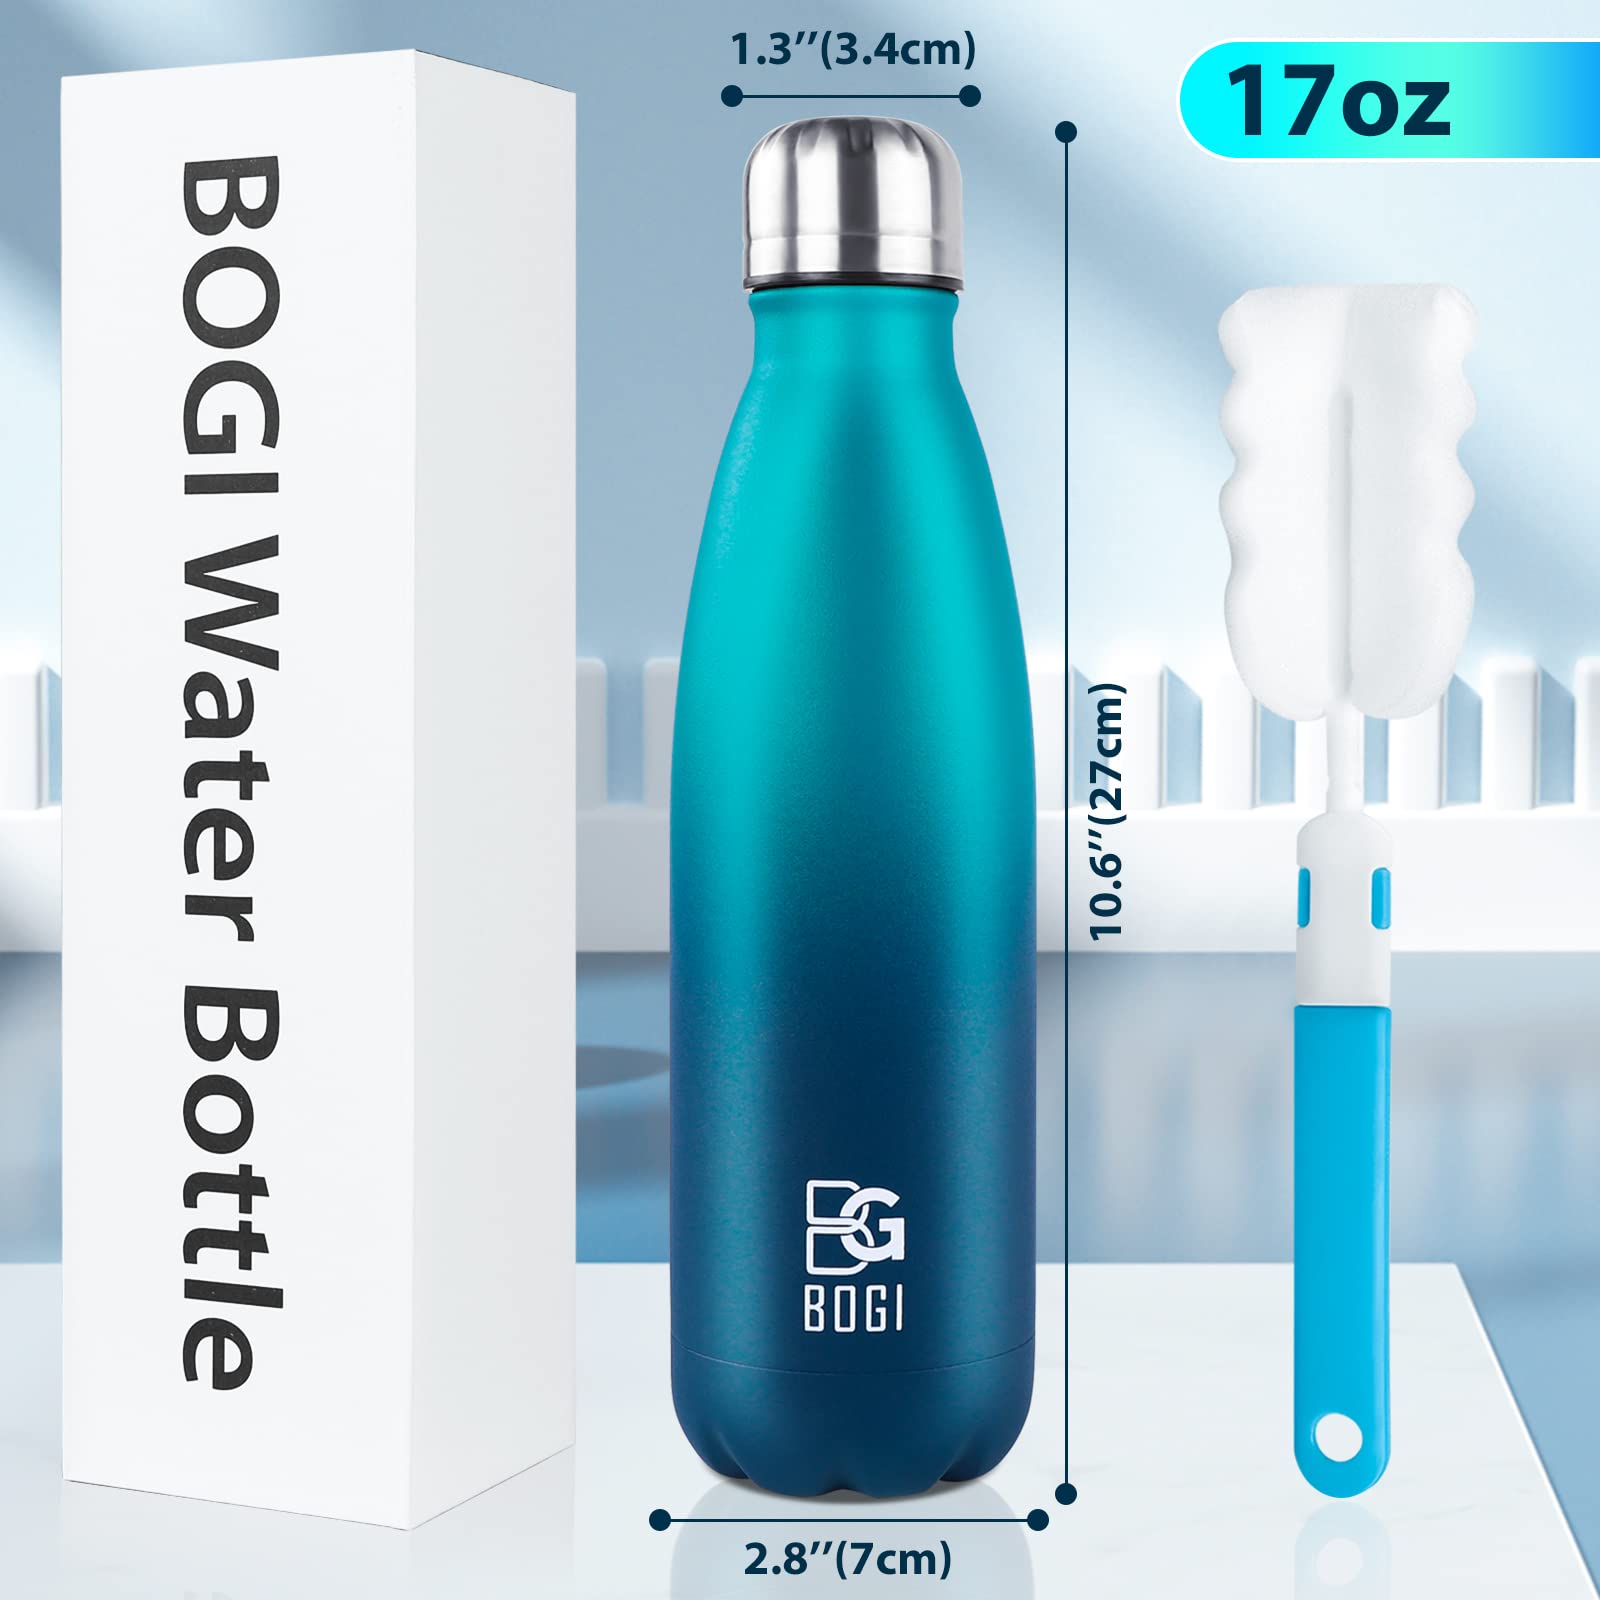 BOGI Insulated Water Bottle, 17oz Stainless Steel Water Bottles, Leak Proof Sports Metal Water Bottles Keep Cold for 24 Hours and Hot for 12 Hours BPA Free kids water bottle for School (Blue DBlue)